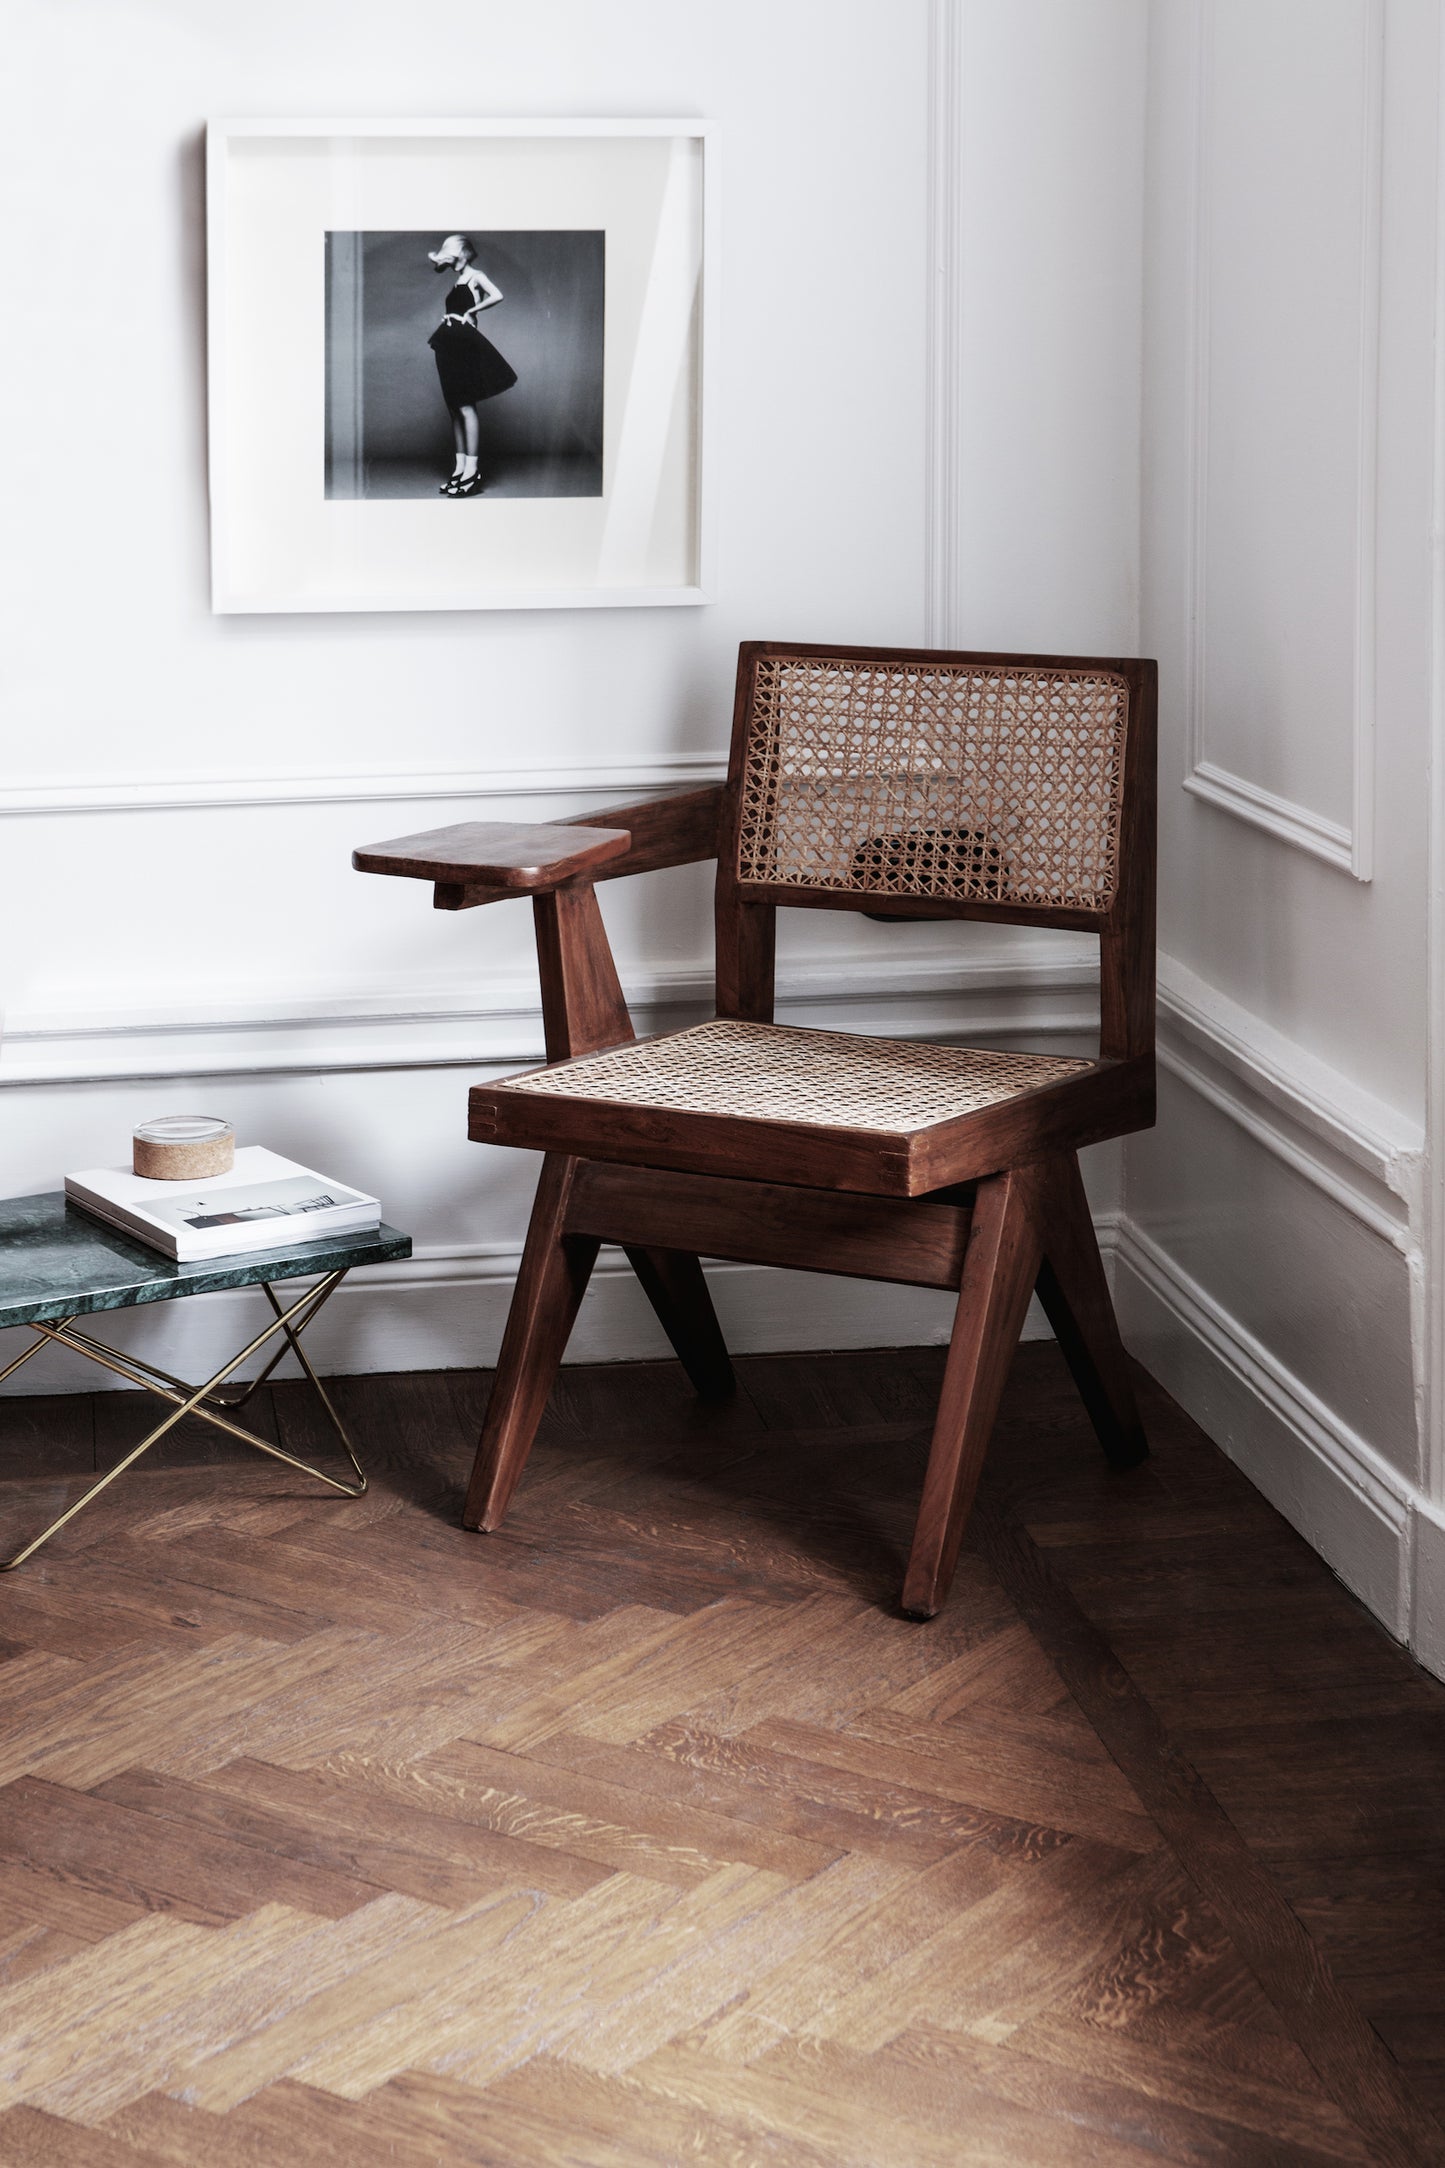 Pierre Jeanneret, Writing Chair